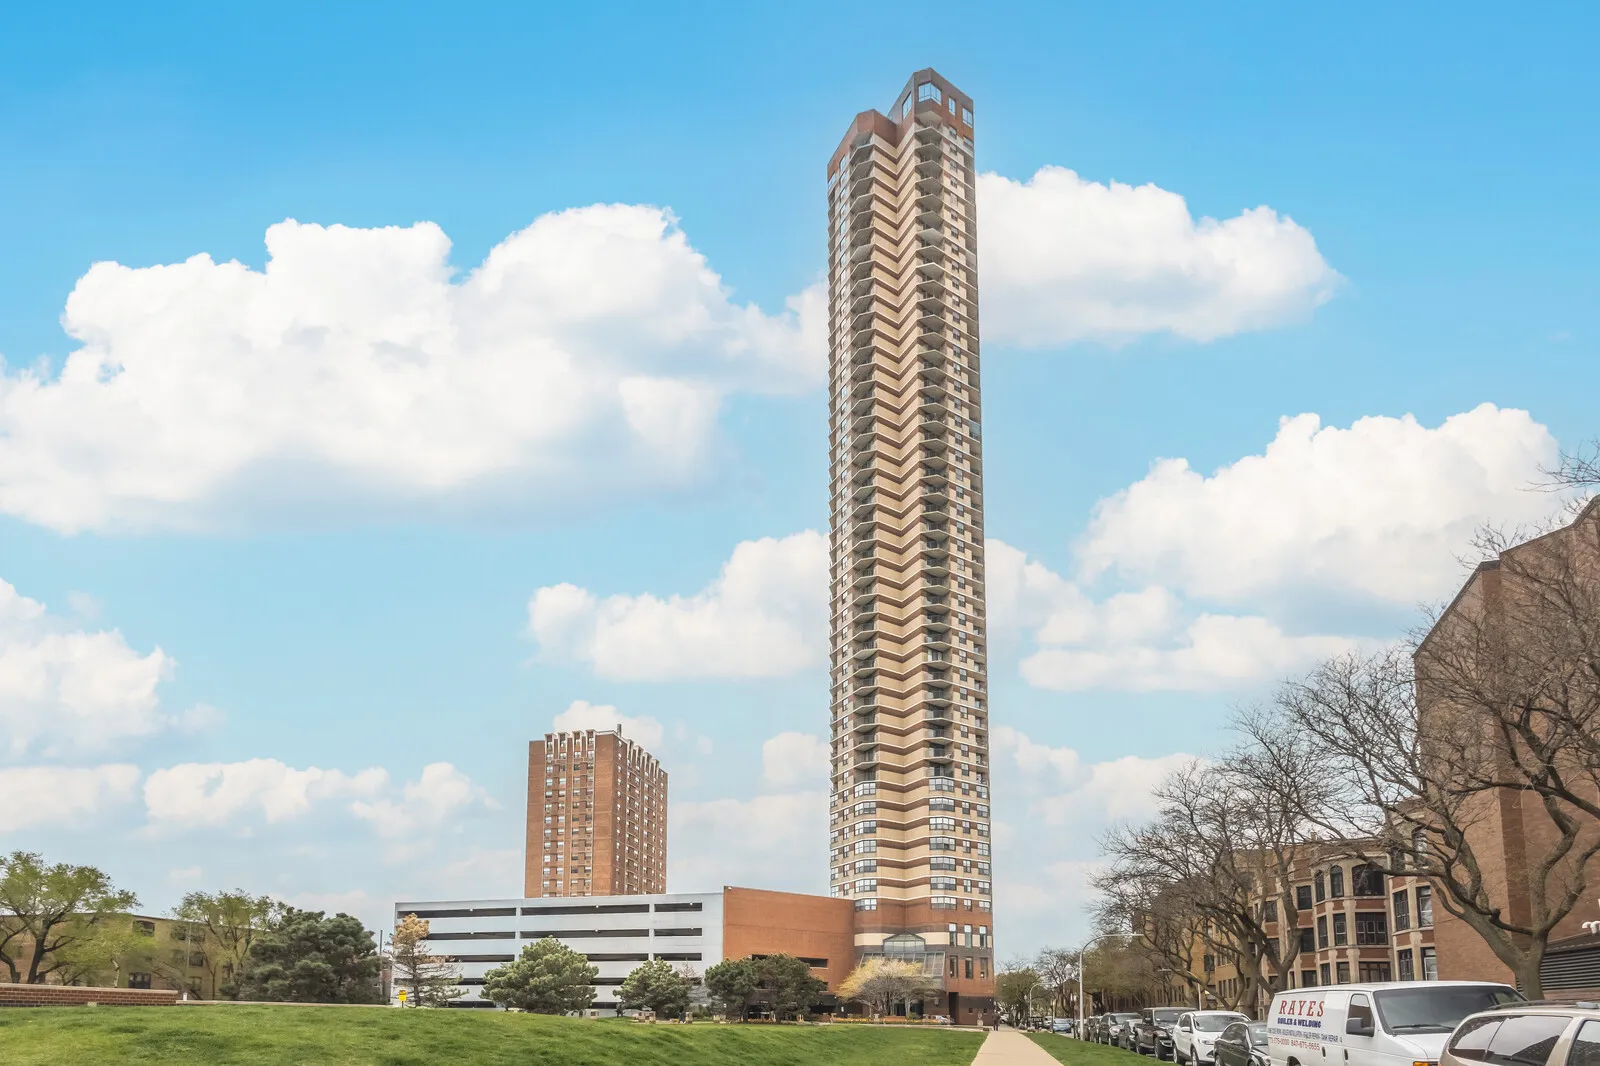 3660 N Lake Shore Dr 60613 60613-New York Private Residences-unit#3912-Chicago-IL